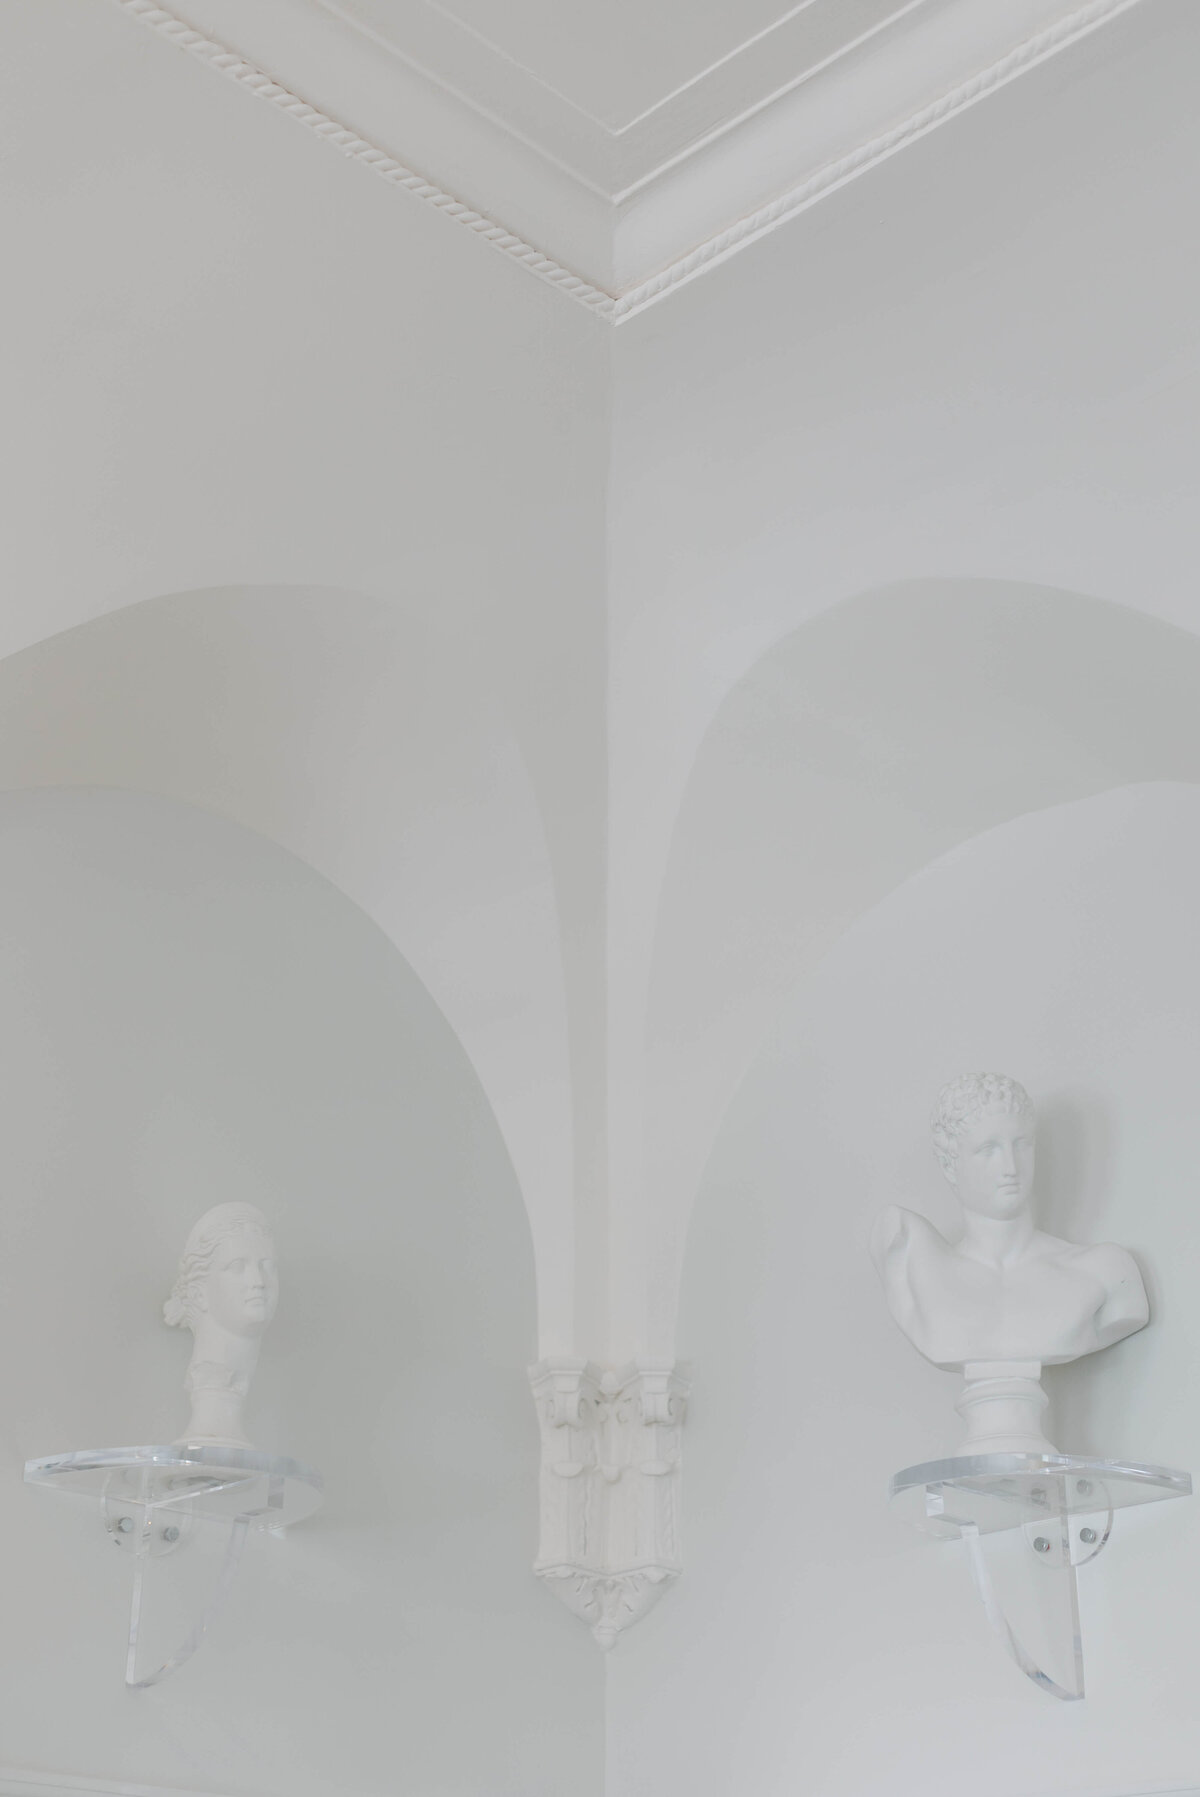 Sculptures sit in the corner of a room.